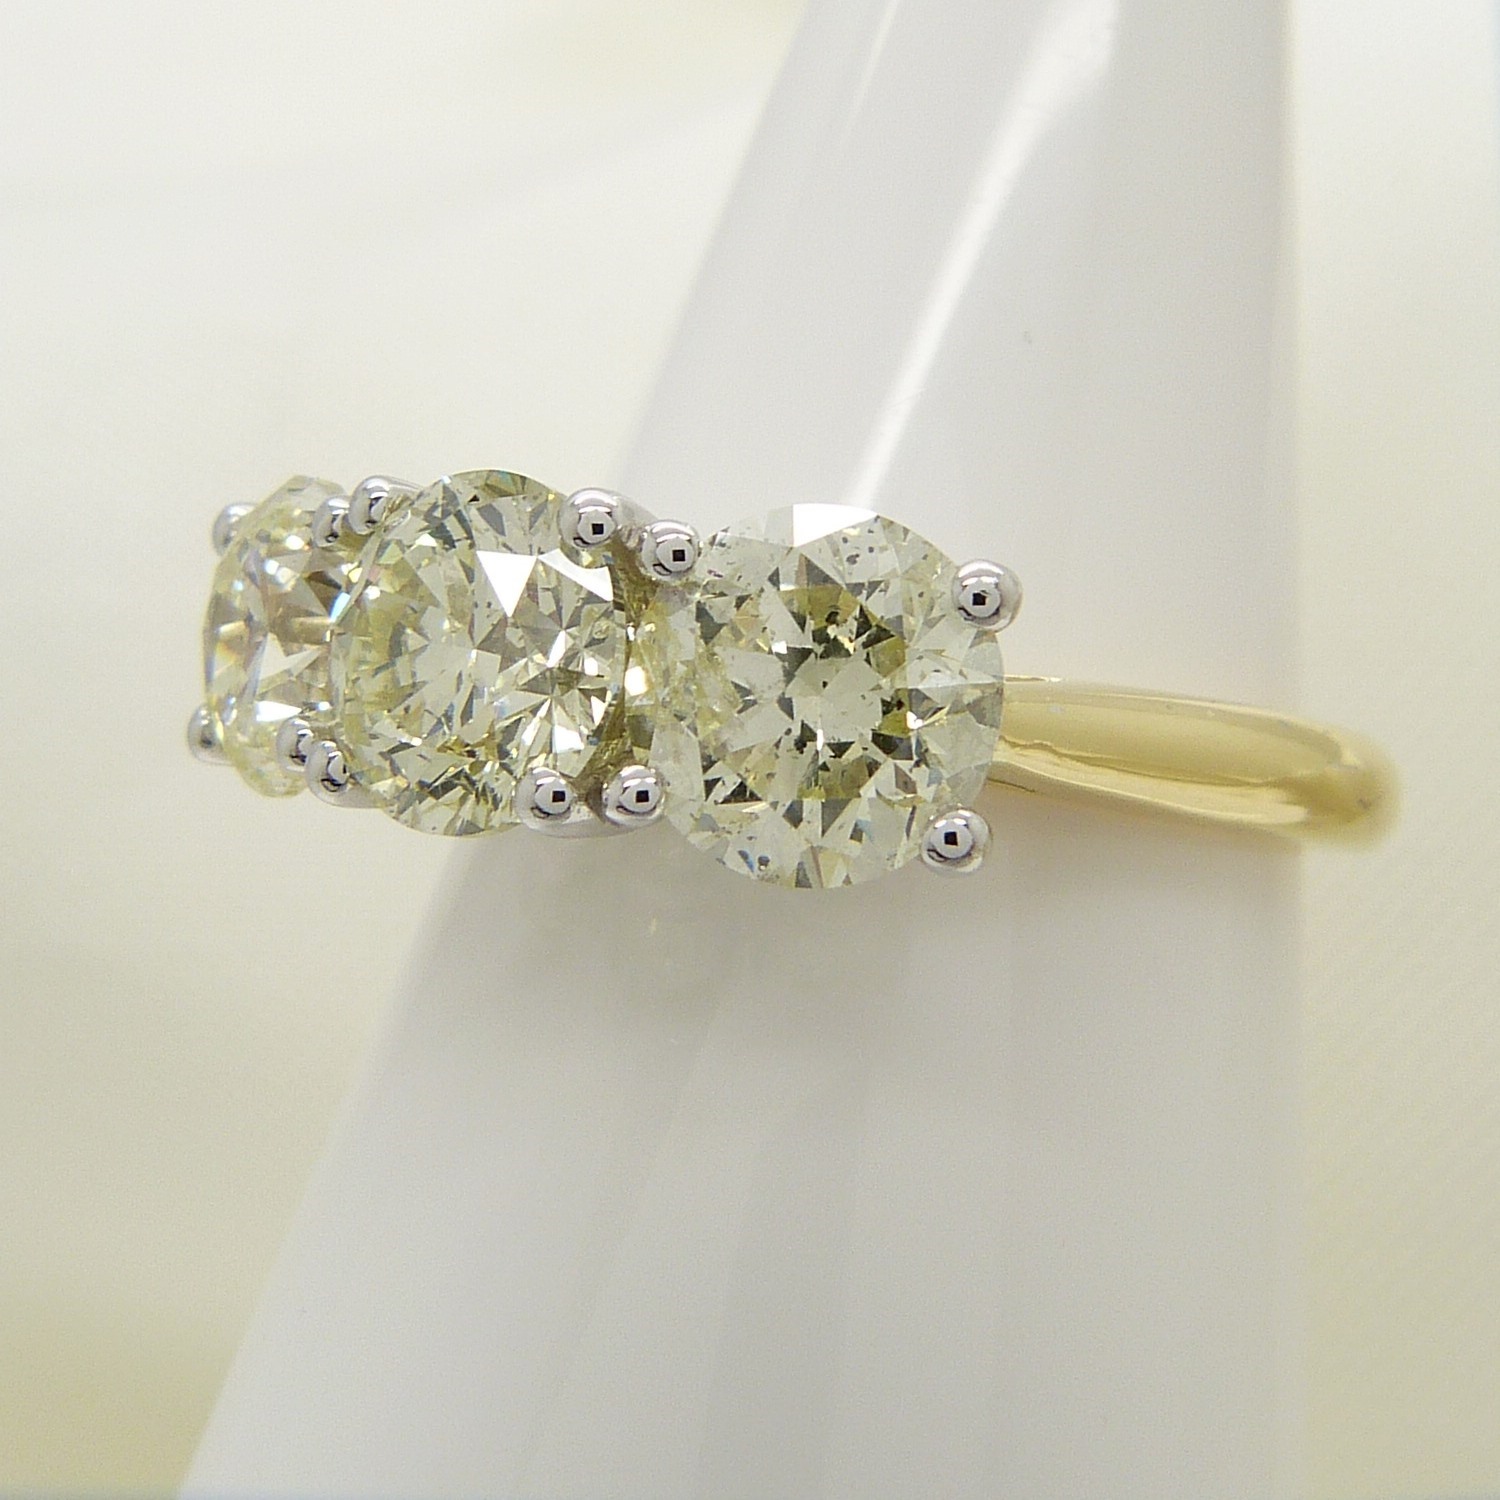 A stunning WGI certificated 3.11 carat diamond 3-stone ring in 18ct yellow and white gold - Image 5 of 8